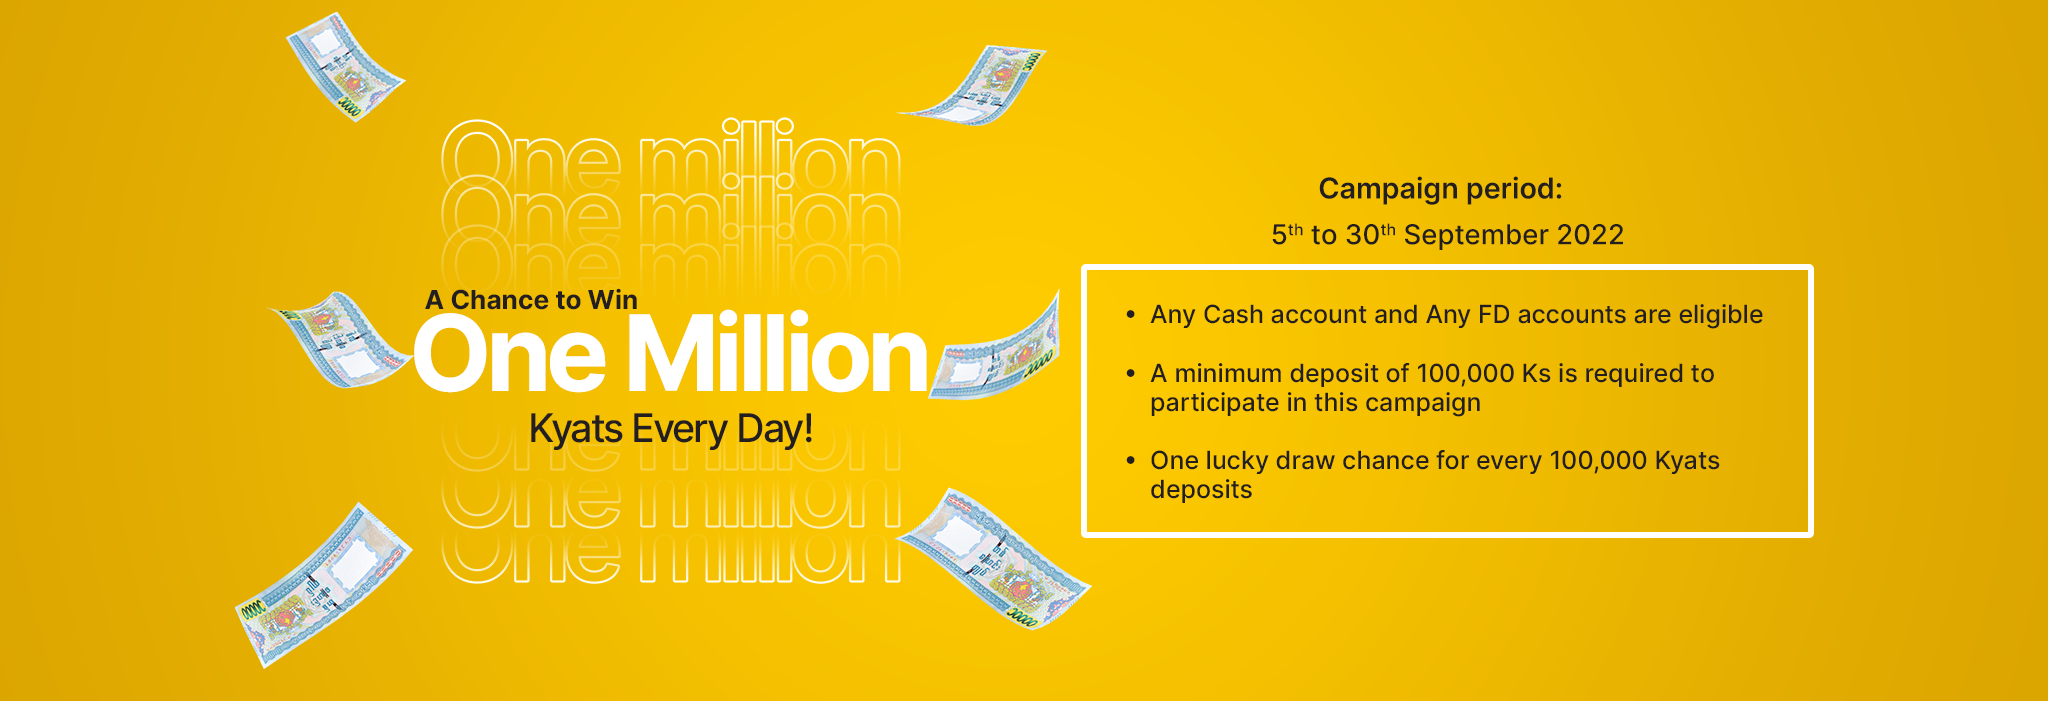 A Chance to Win 1 Million Kyats Every Day